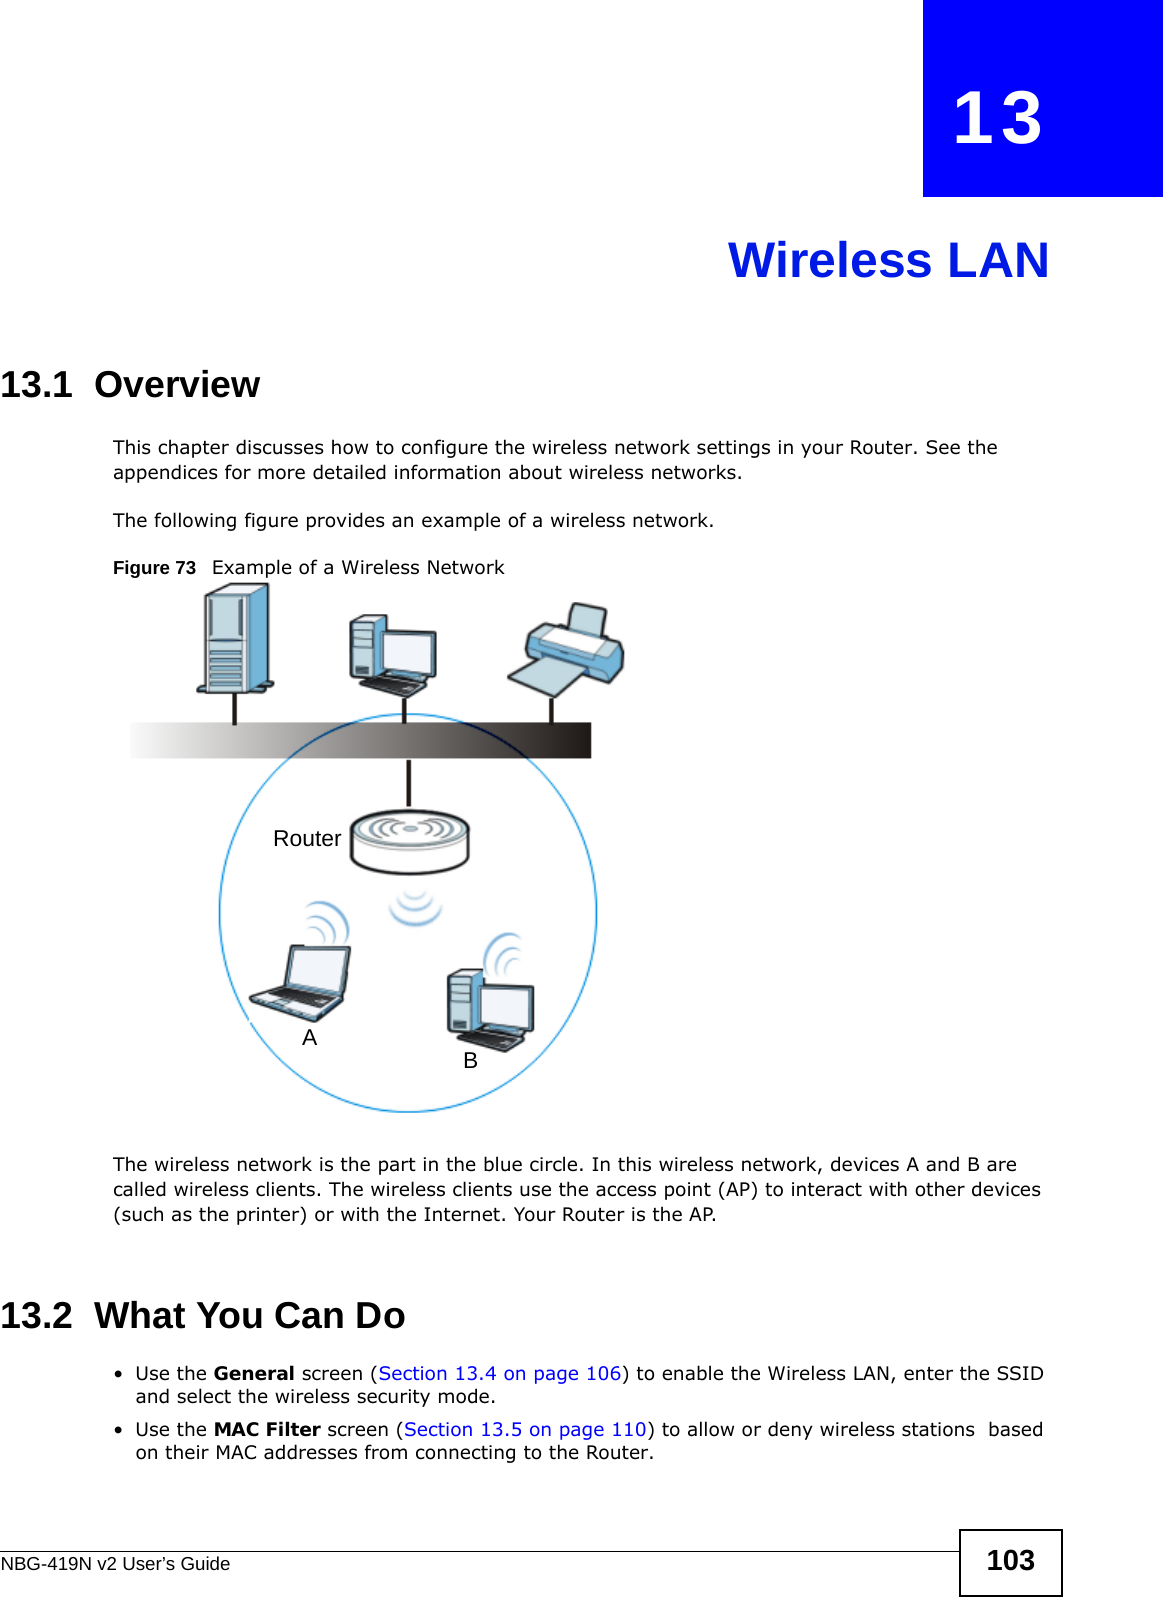 NBG-419N v2 User’s Guide 103CHAPTER   13Wireless LAN13.1  OverviewThis chapter discusses how to configure the wireless network settings in your Router. See the appendices for more detailed information about wireless networks.The following figure provides an example of a wireless network.Figure 73   Example of a Wireless NetworkThe wireless network is the part in the blue circle. In this wireless network, devices A and B are called wireless clients. The wireless clients use the access point (AP) to interact with other devices (such as the printer) or with the Internet. Your Router is the AP.13.2  What You Can Do•Use the General screen (Section 13.4 on page 106) to enable the Wireless LAN, enter the SSID and select the wireless security mode.•Use the MAC Filter screen (Section 13.5 on page 110) to allow or deny wireless stations  based on their MAC addresses from connecting to the Router.ABRouter